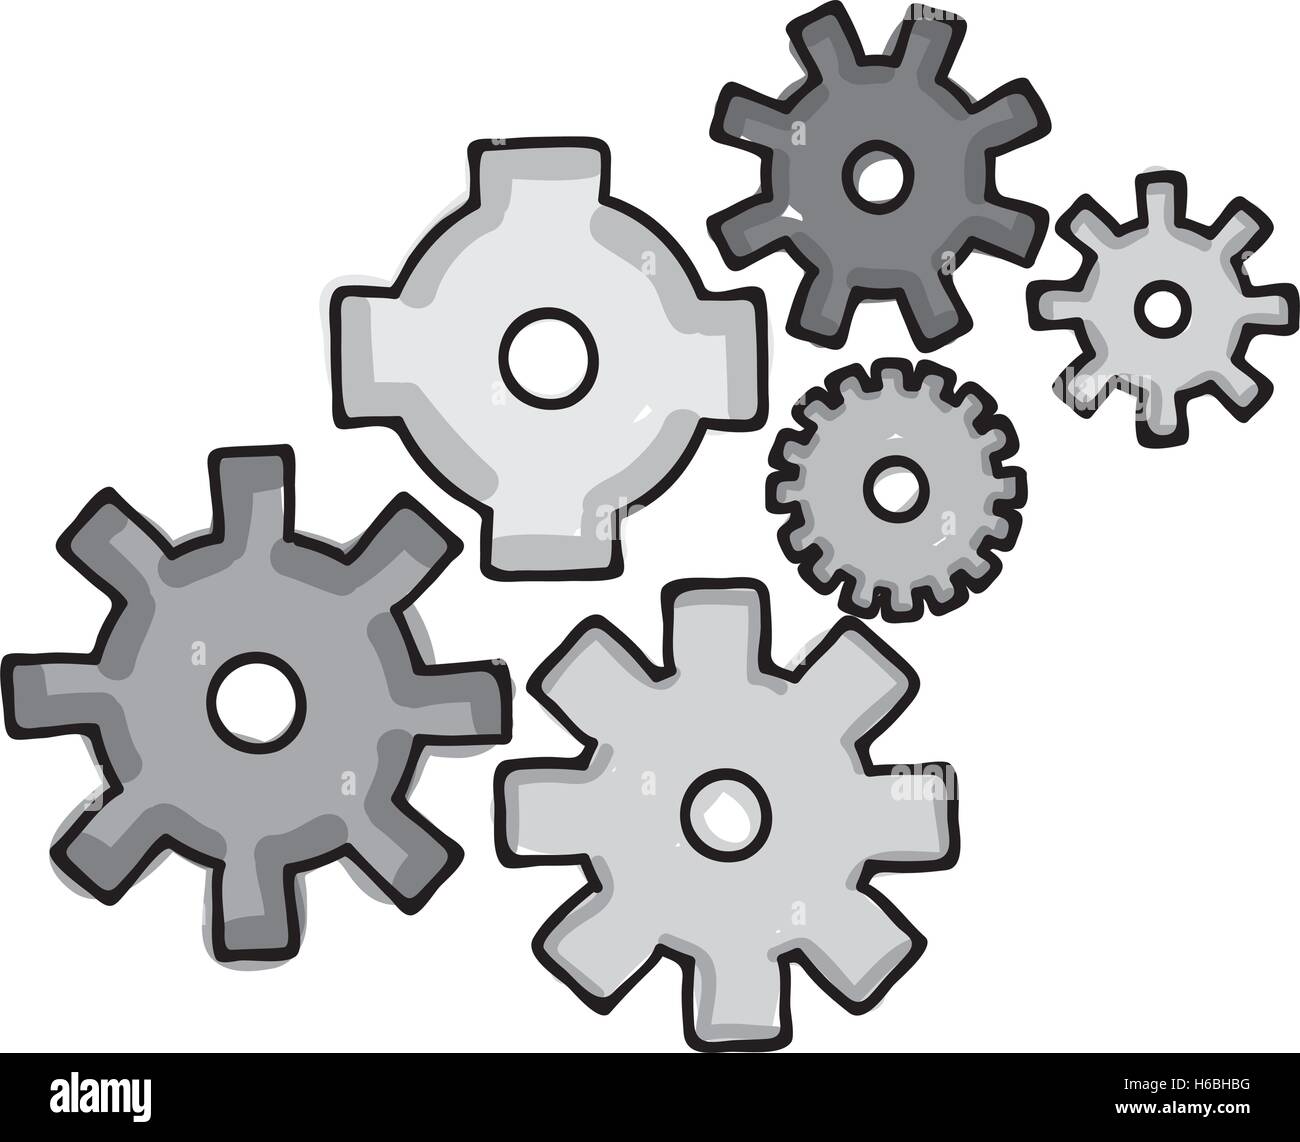 Cartoon Cog Symbol Cut Out Stock Images & Pictures - Alamy